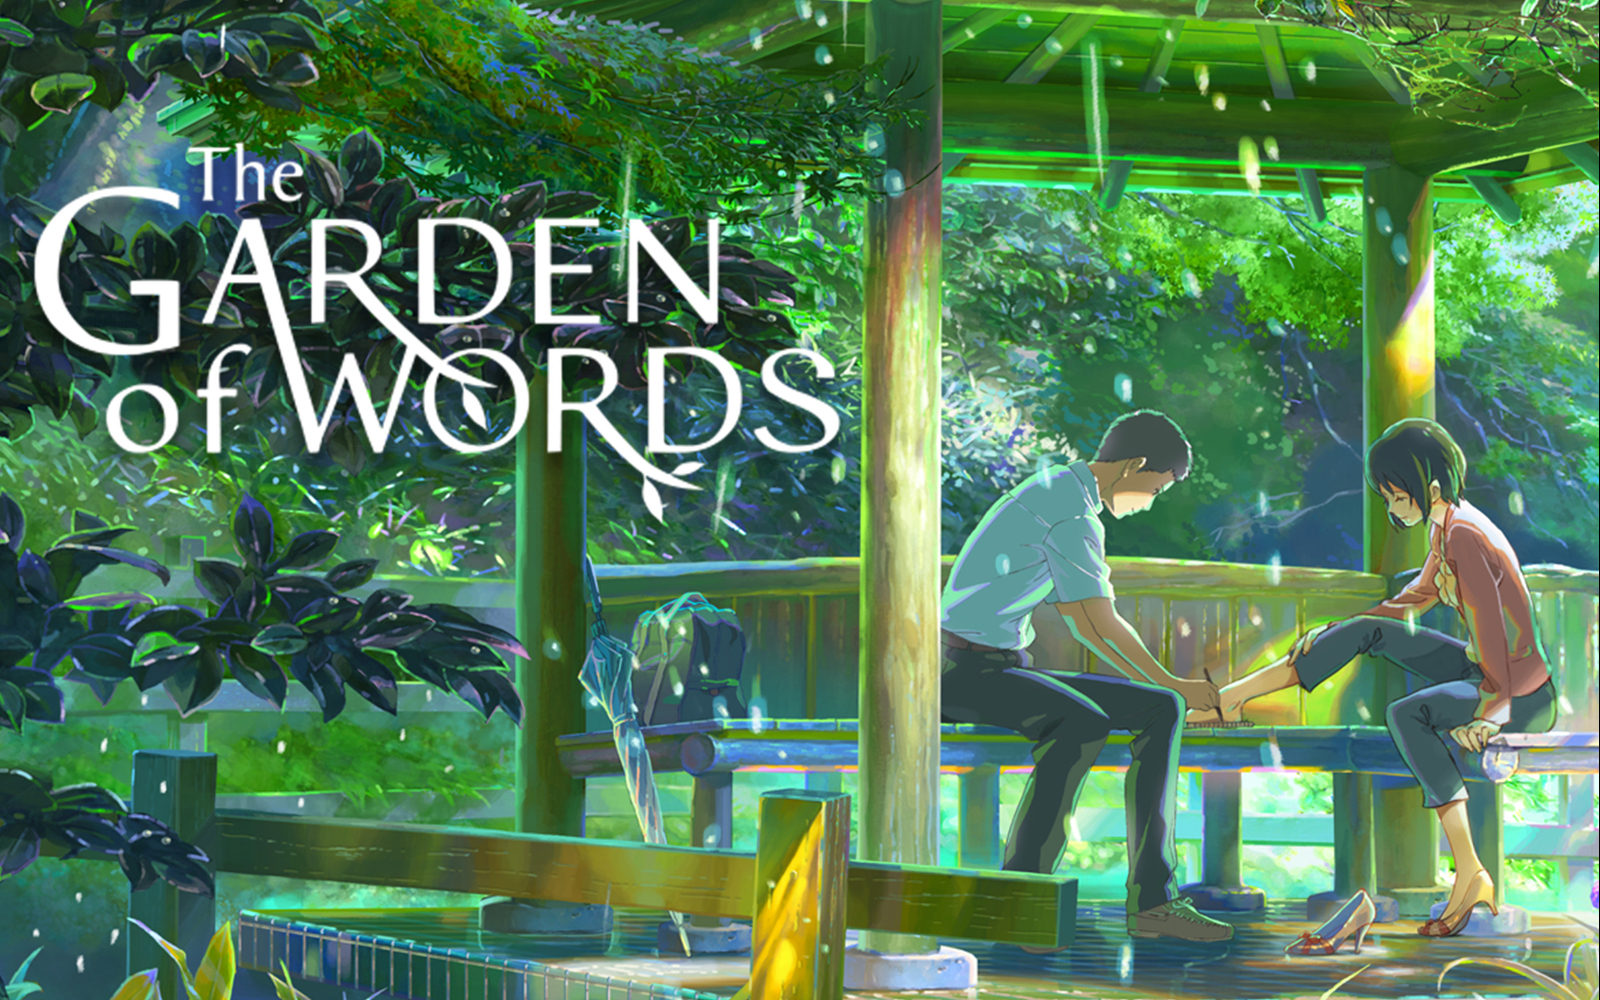 Image of The Garden of Words